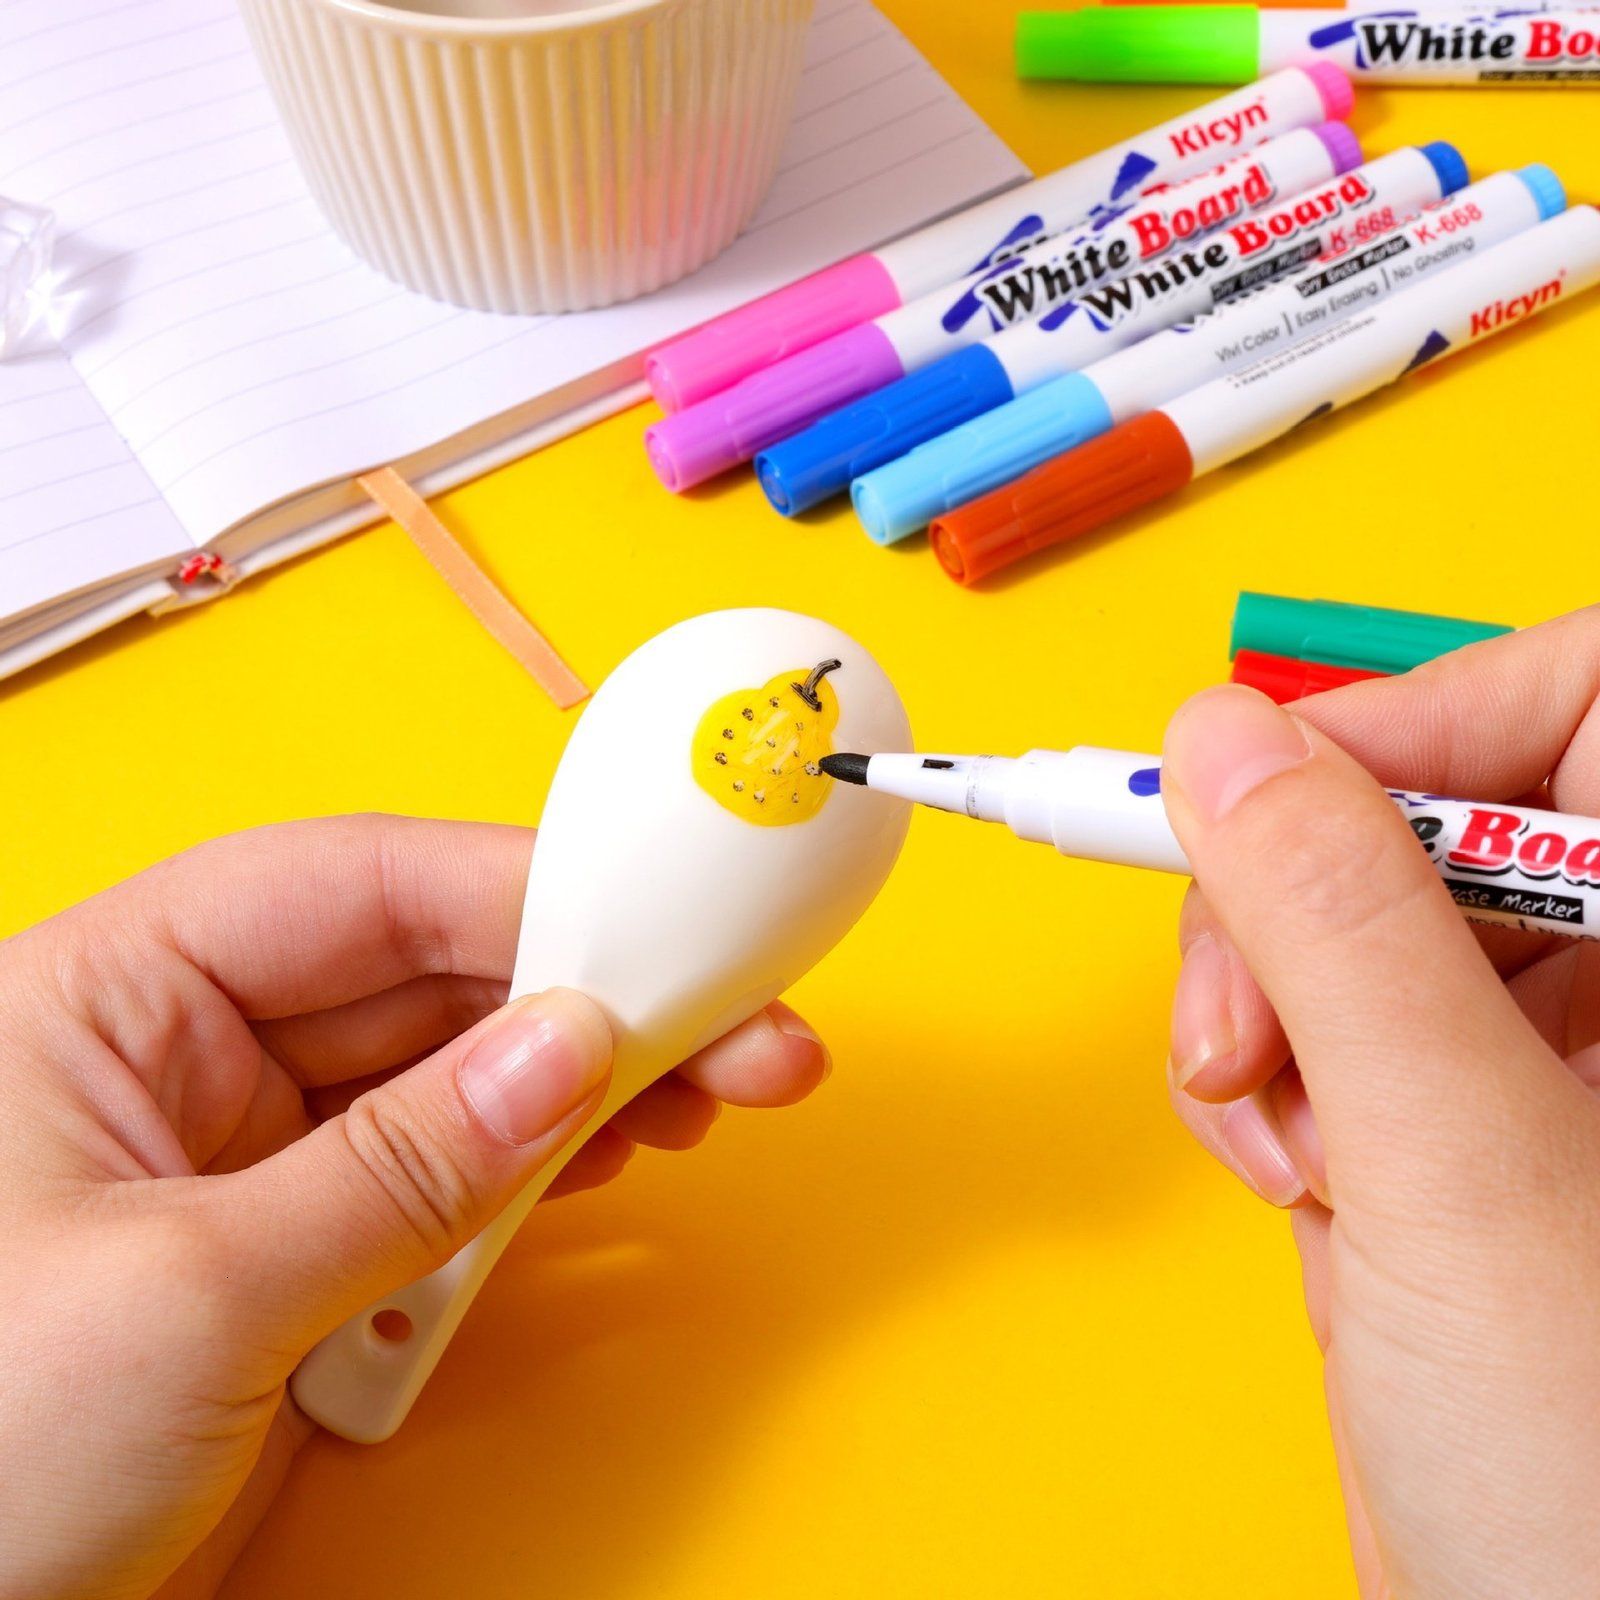 Deli 8/12 Colors Magical Water Painting Pen Water Floating Doodle Pens  Children Diy Early Education Toys Art Whiteboard Marker